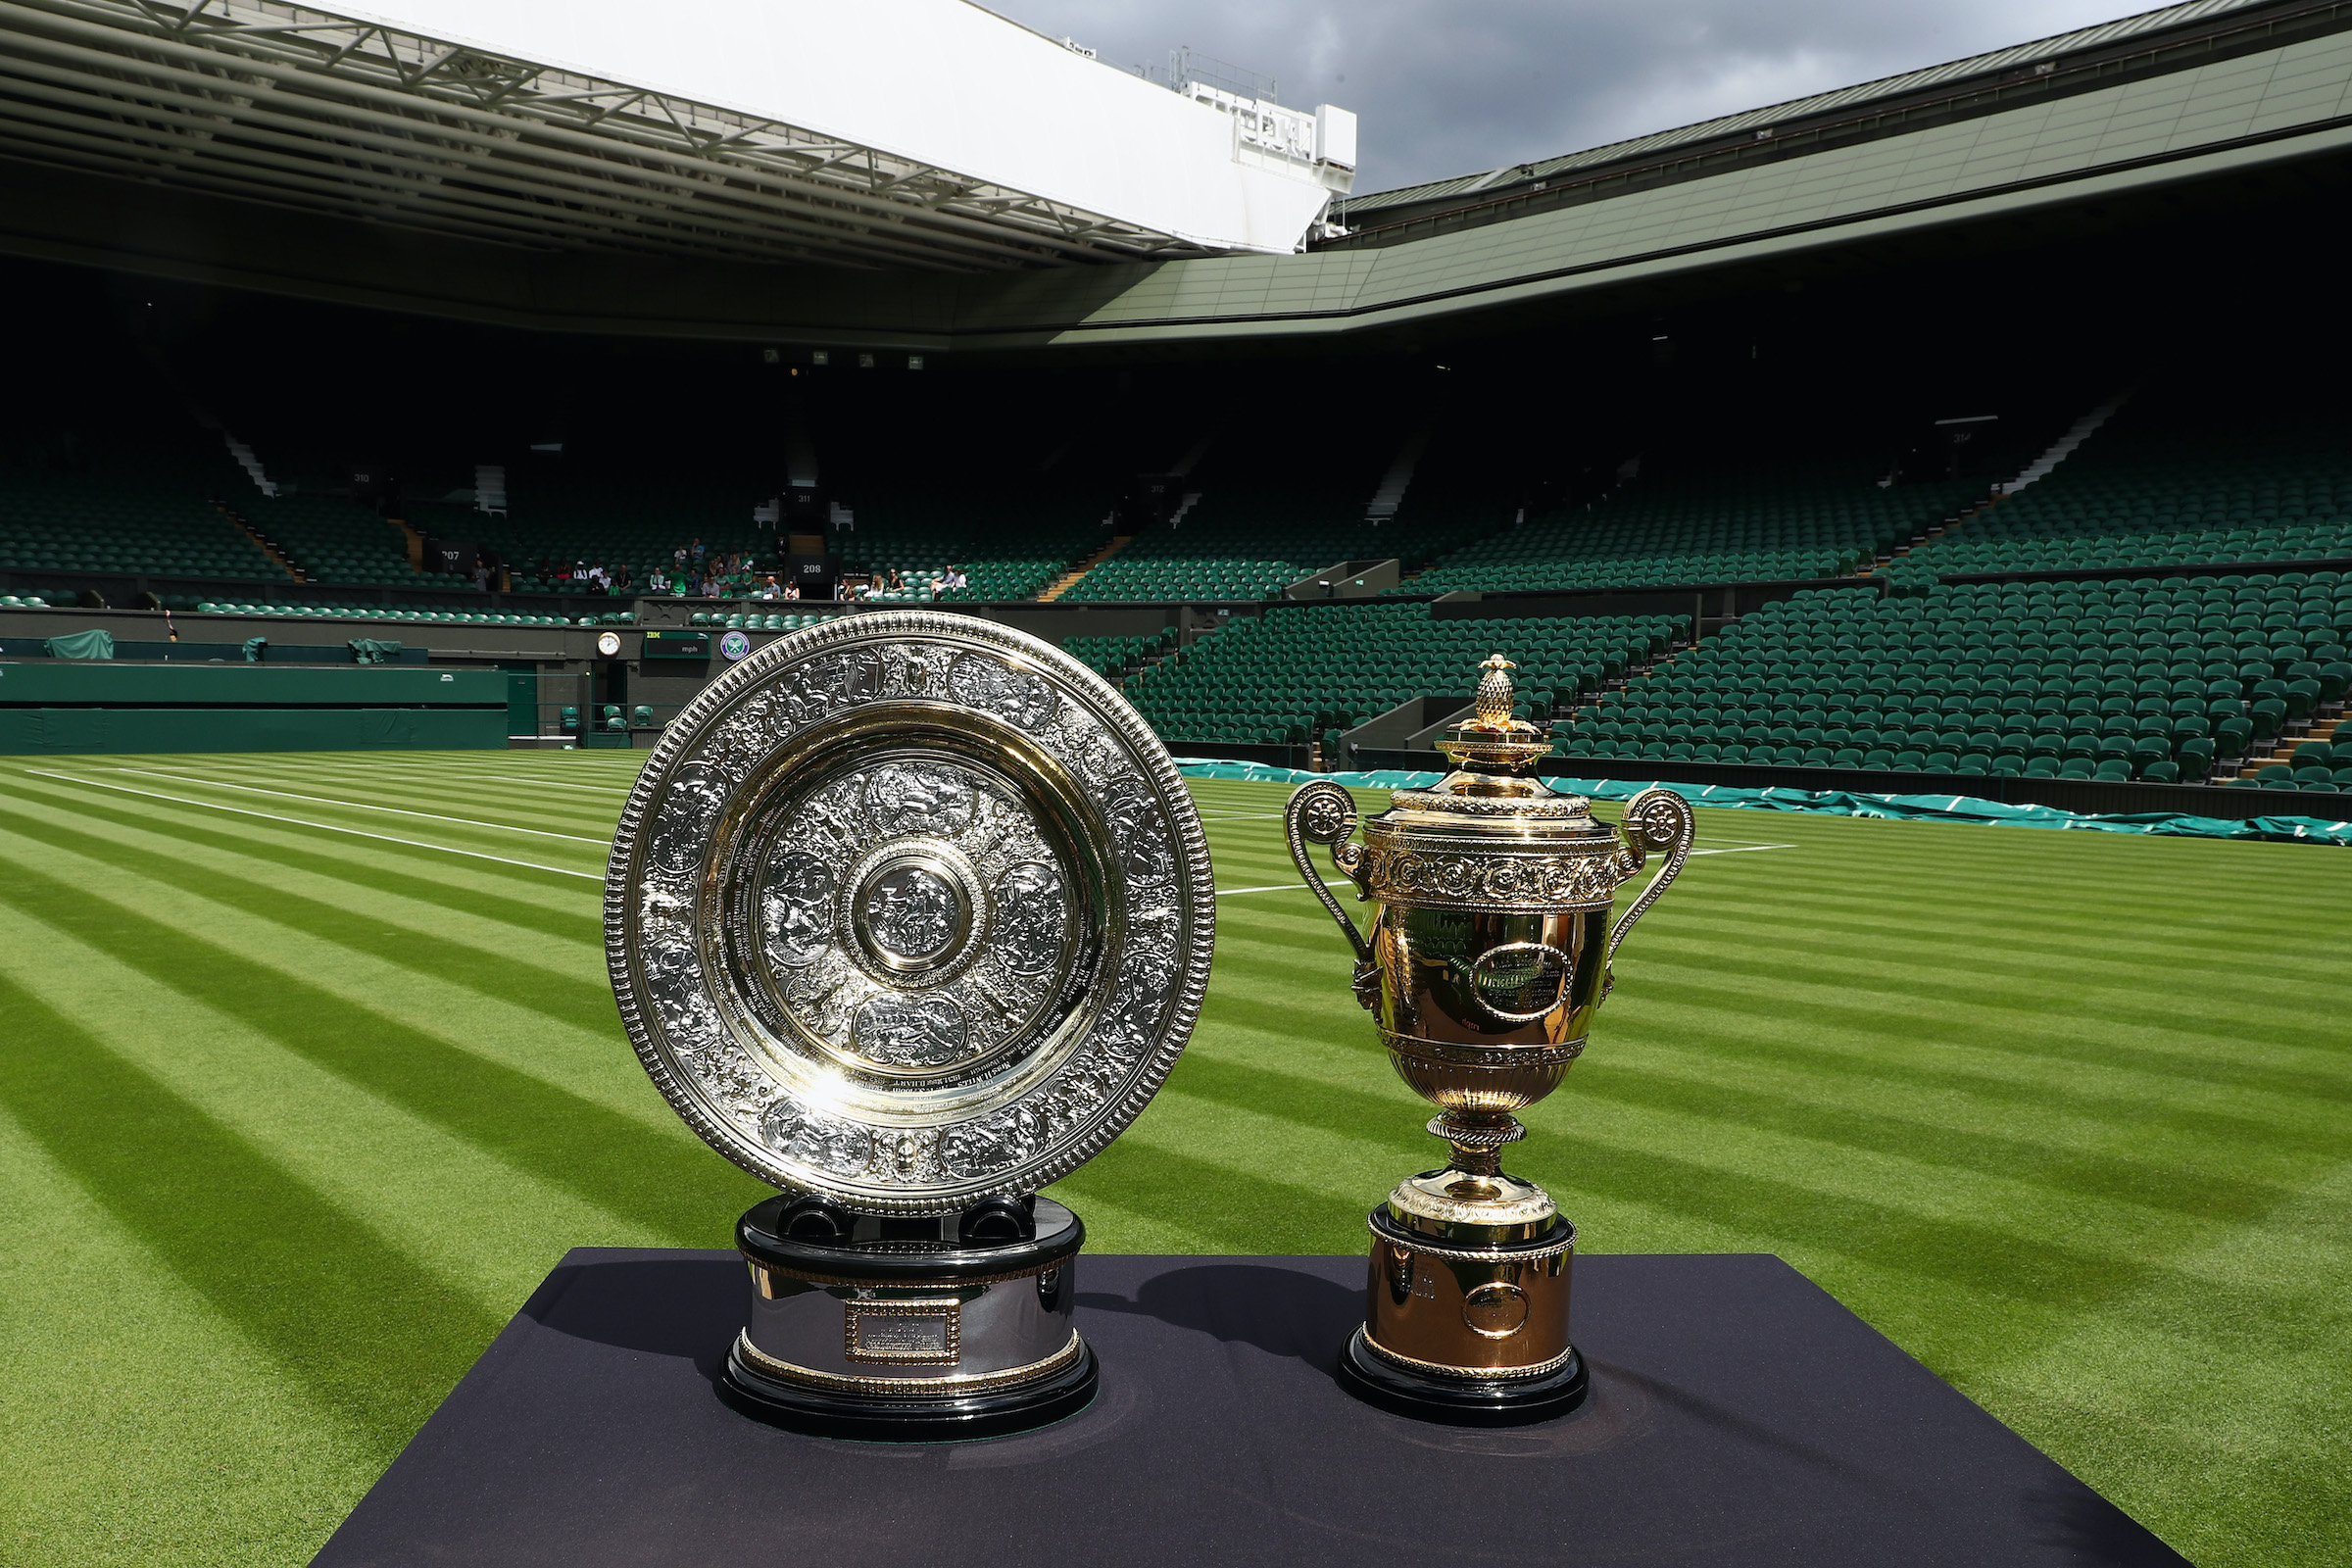 The Wimbledon trophies sit on a table.